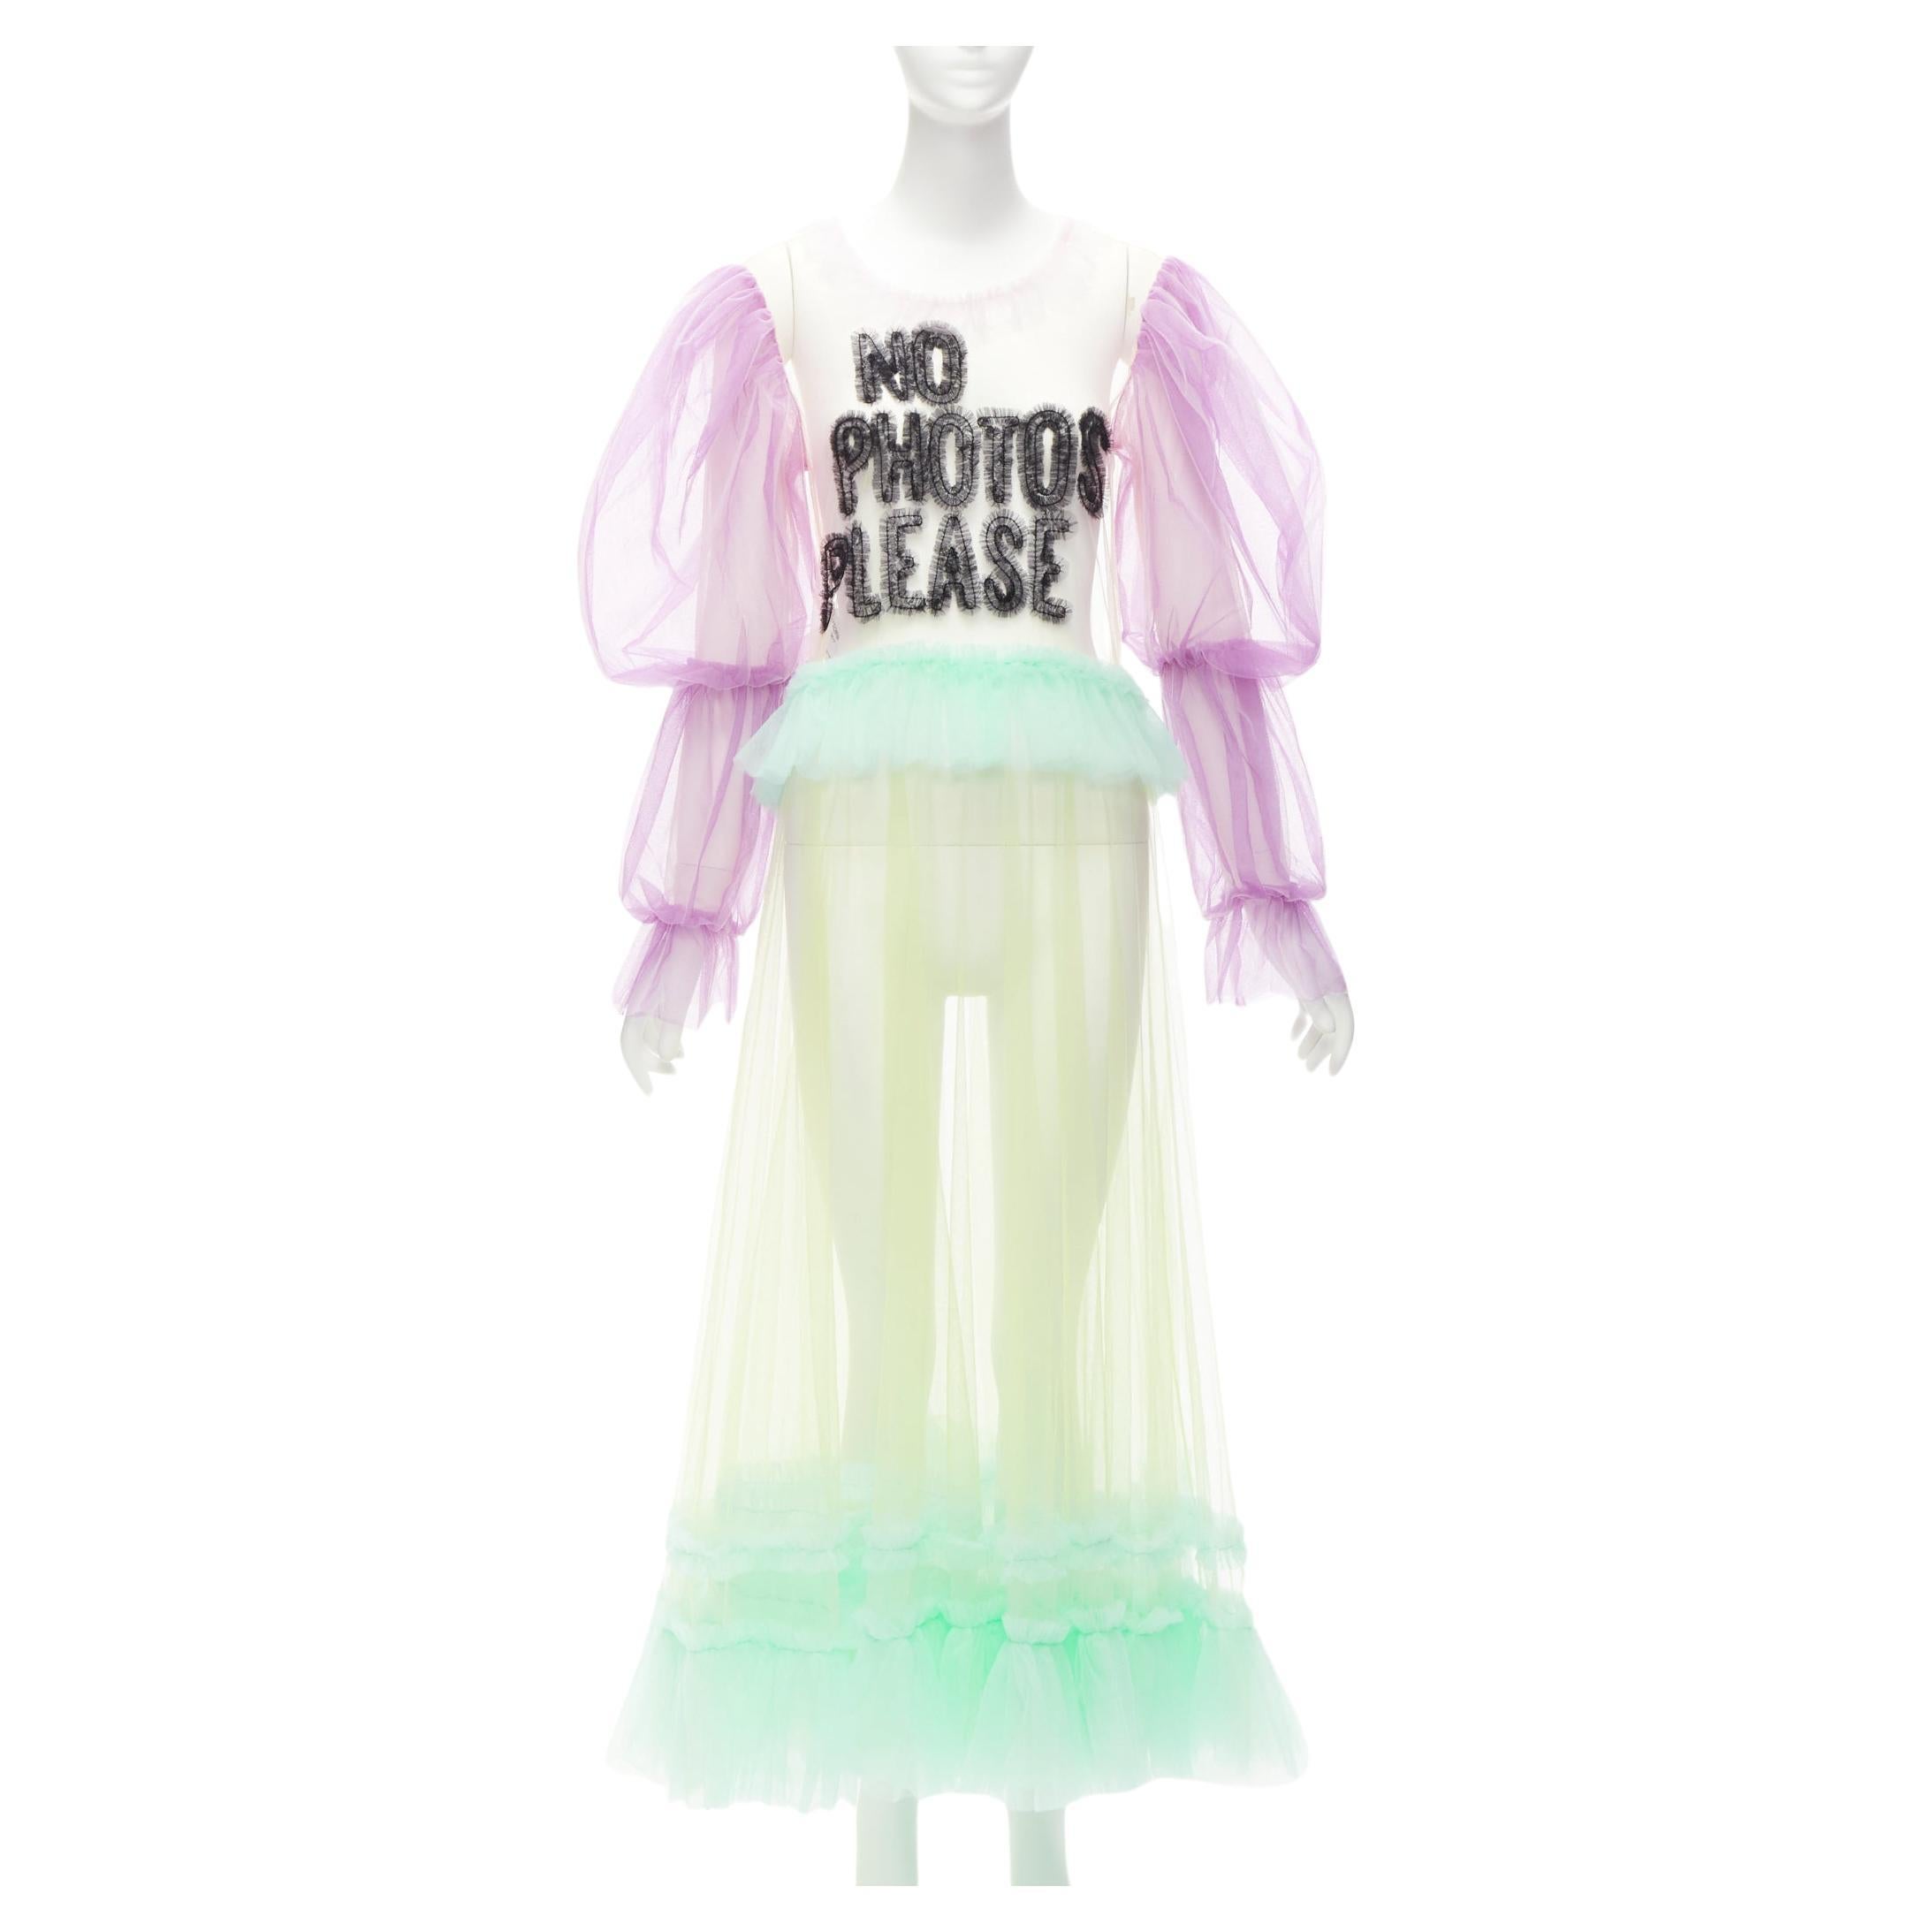 VIKTOR ROLF 2019 TULLE No Photos Please ruffle pastel puff sleeves sheer dress M For Sale